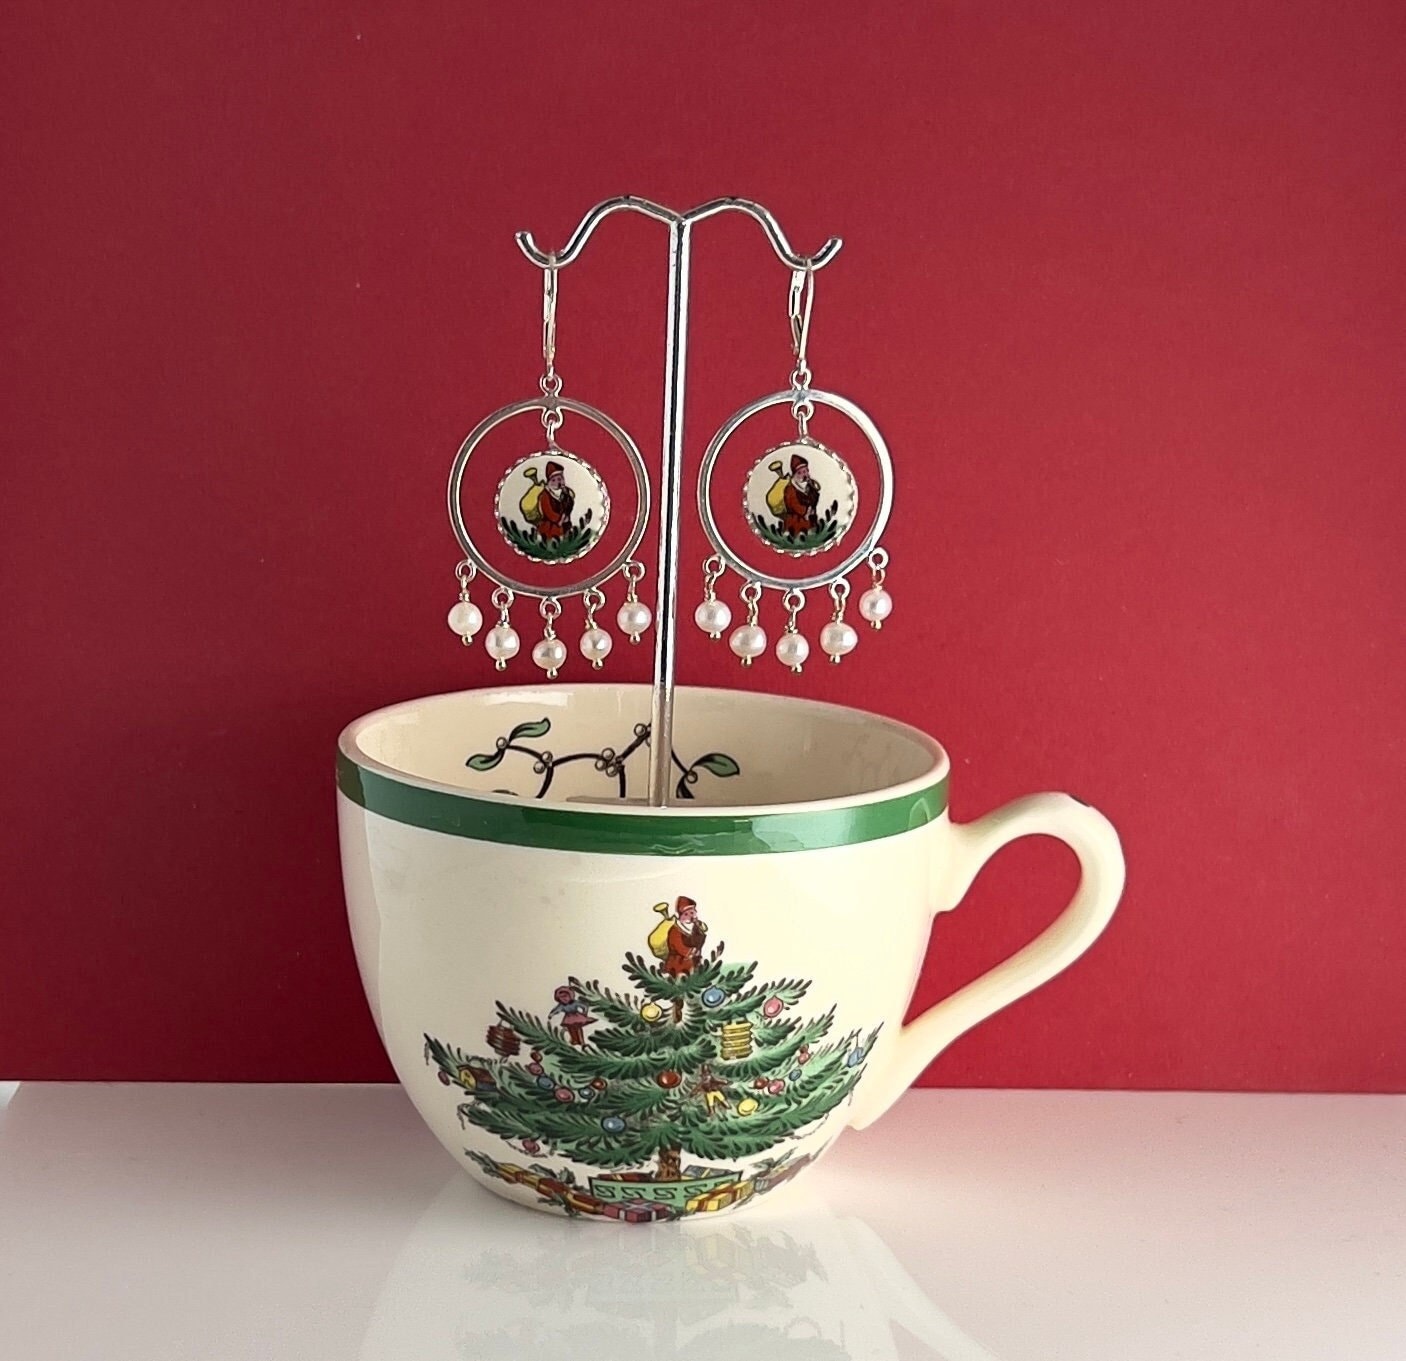 Unique Santa Earrings, Spode Christmas Tree China Broken China Jewelry, Freshwater Pearls